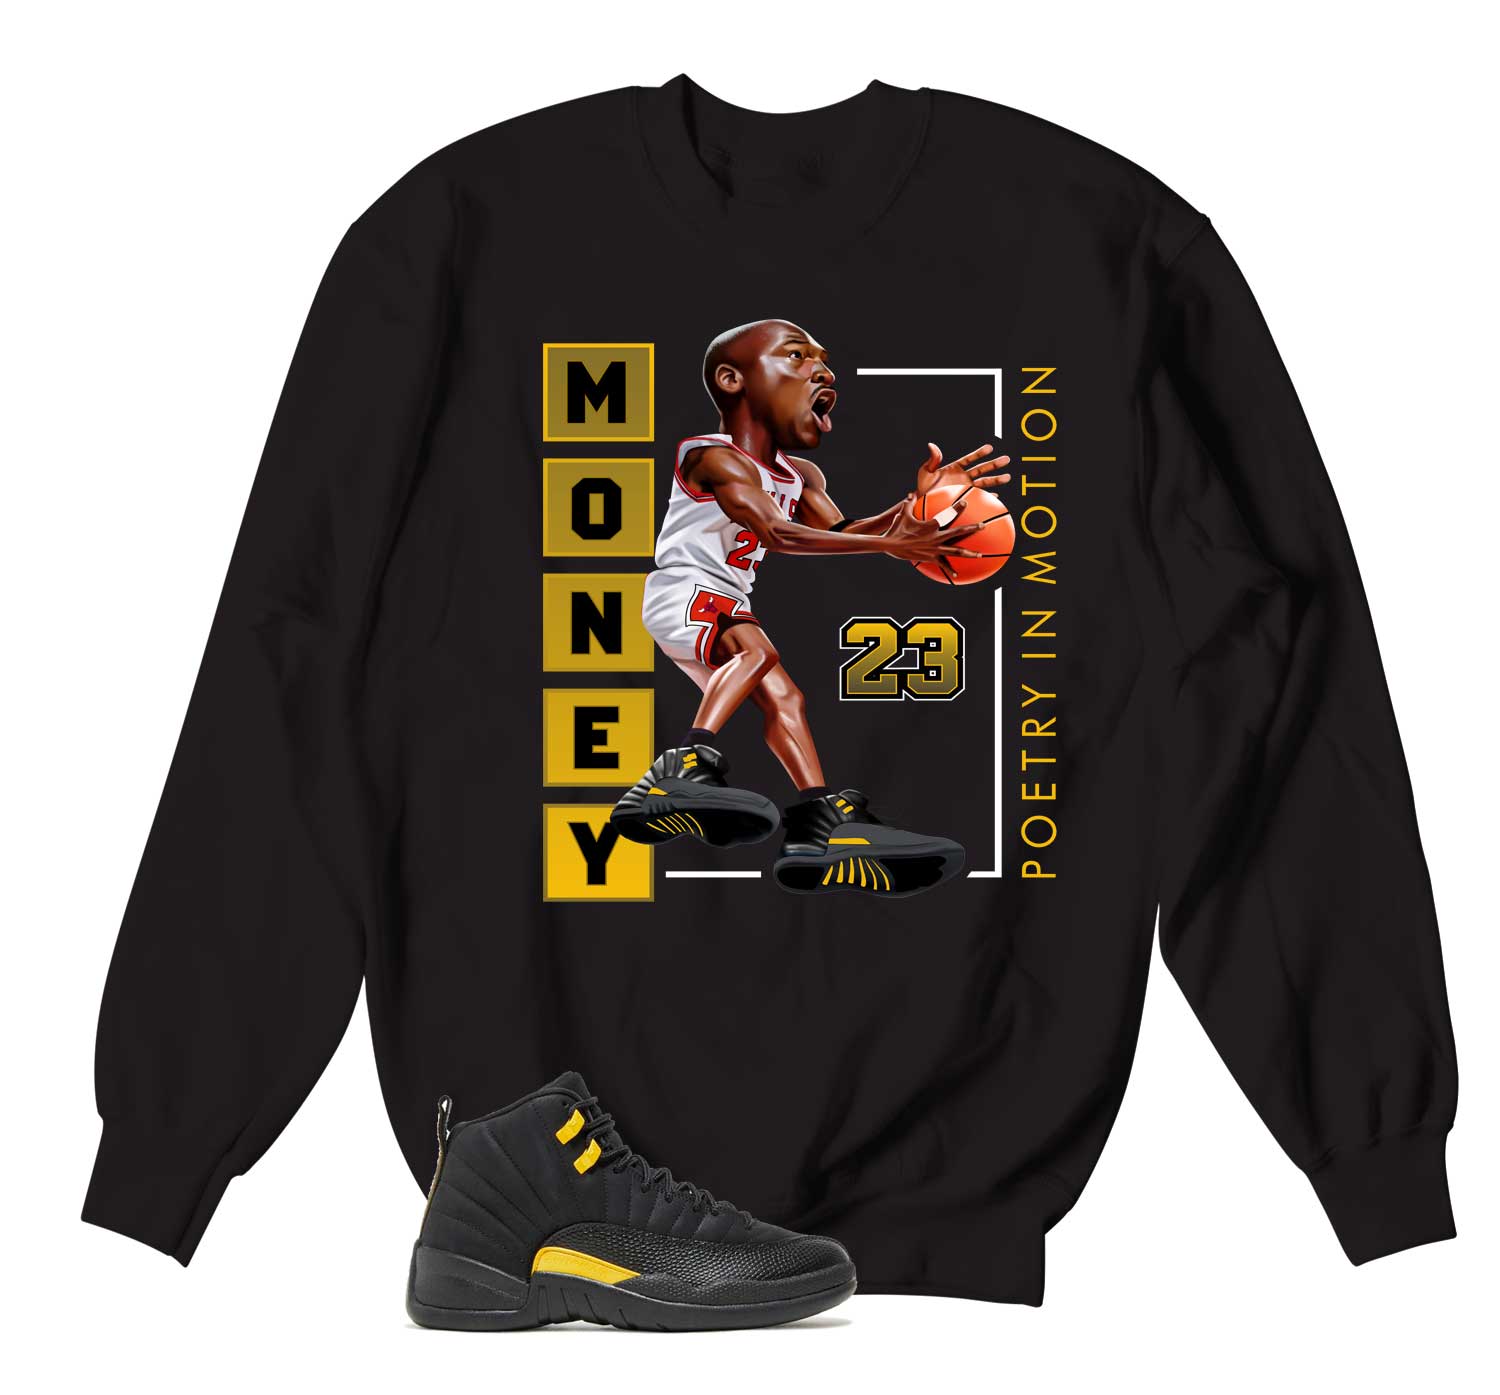 Retro 12 Black Taxi Sweater - Poetry In Motion - Black